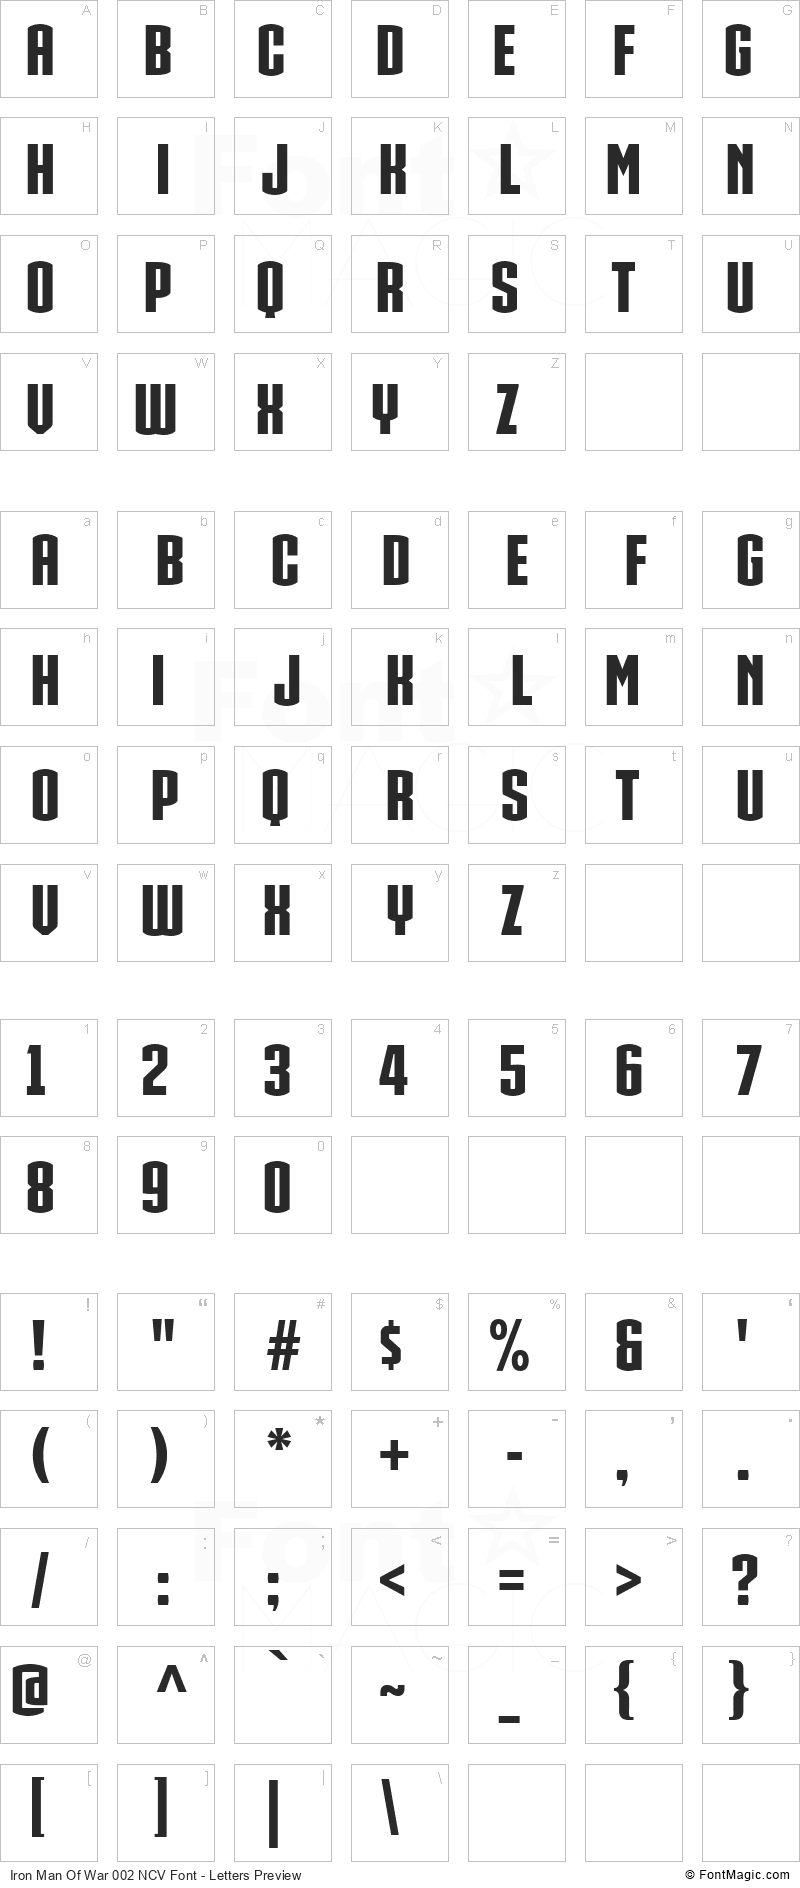 Iron Man Of War 002 NCV Font - All Latters Preview Chart